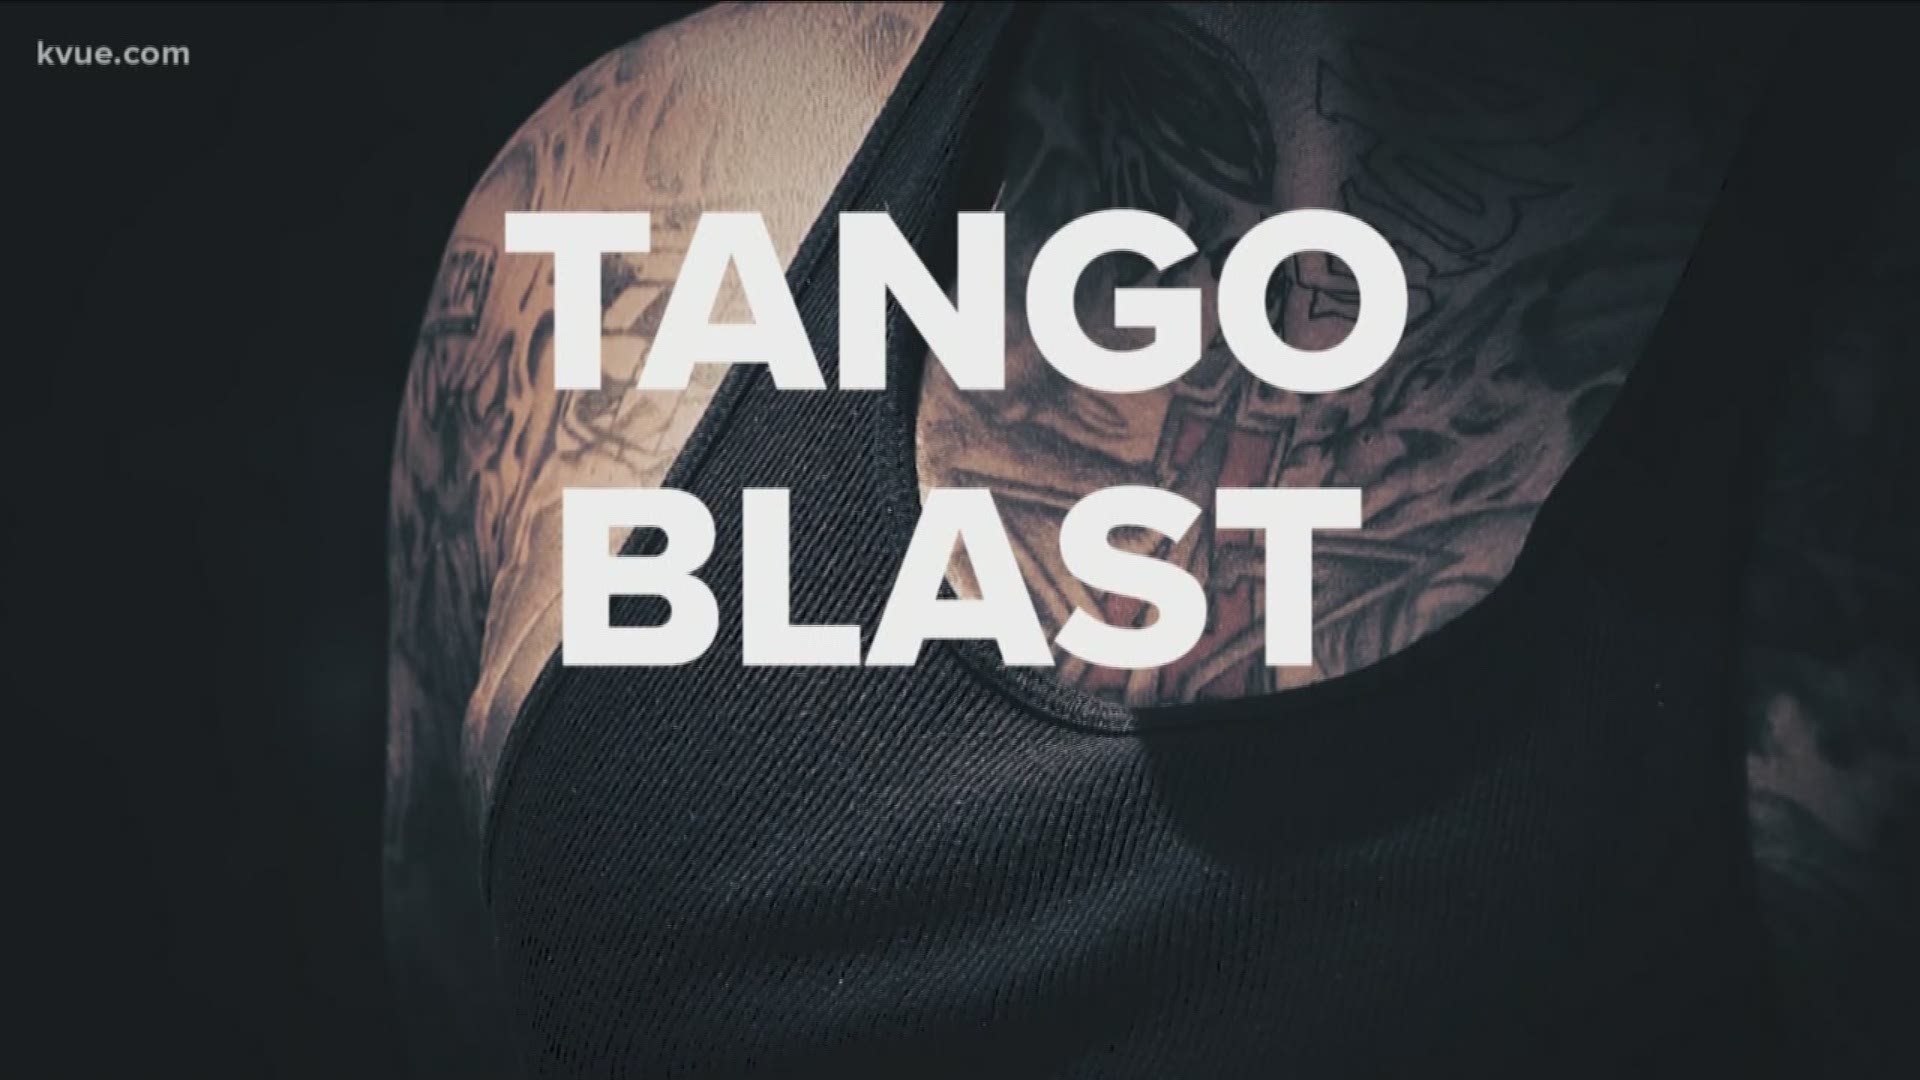 Texas DPS says Tango Blast is one of the fastest growing gangs in Texas. 